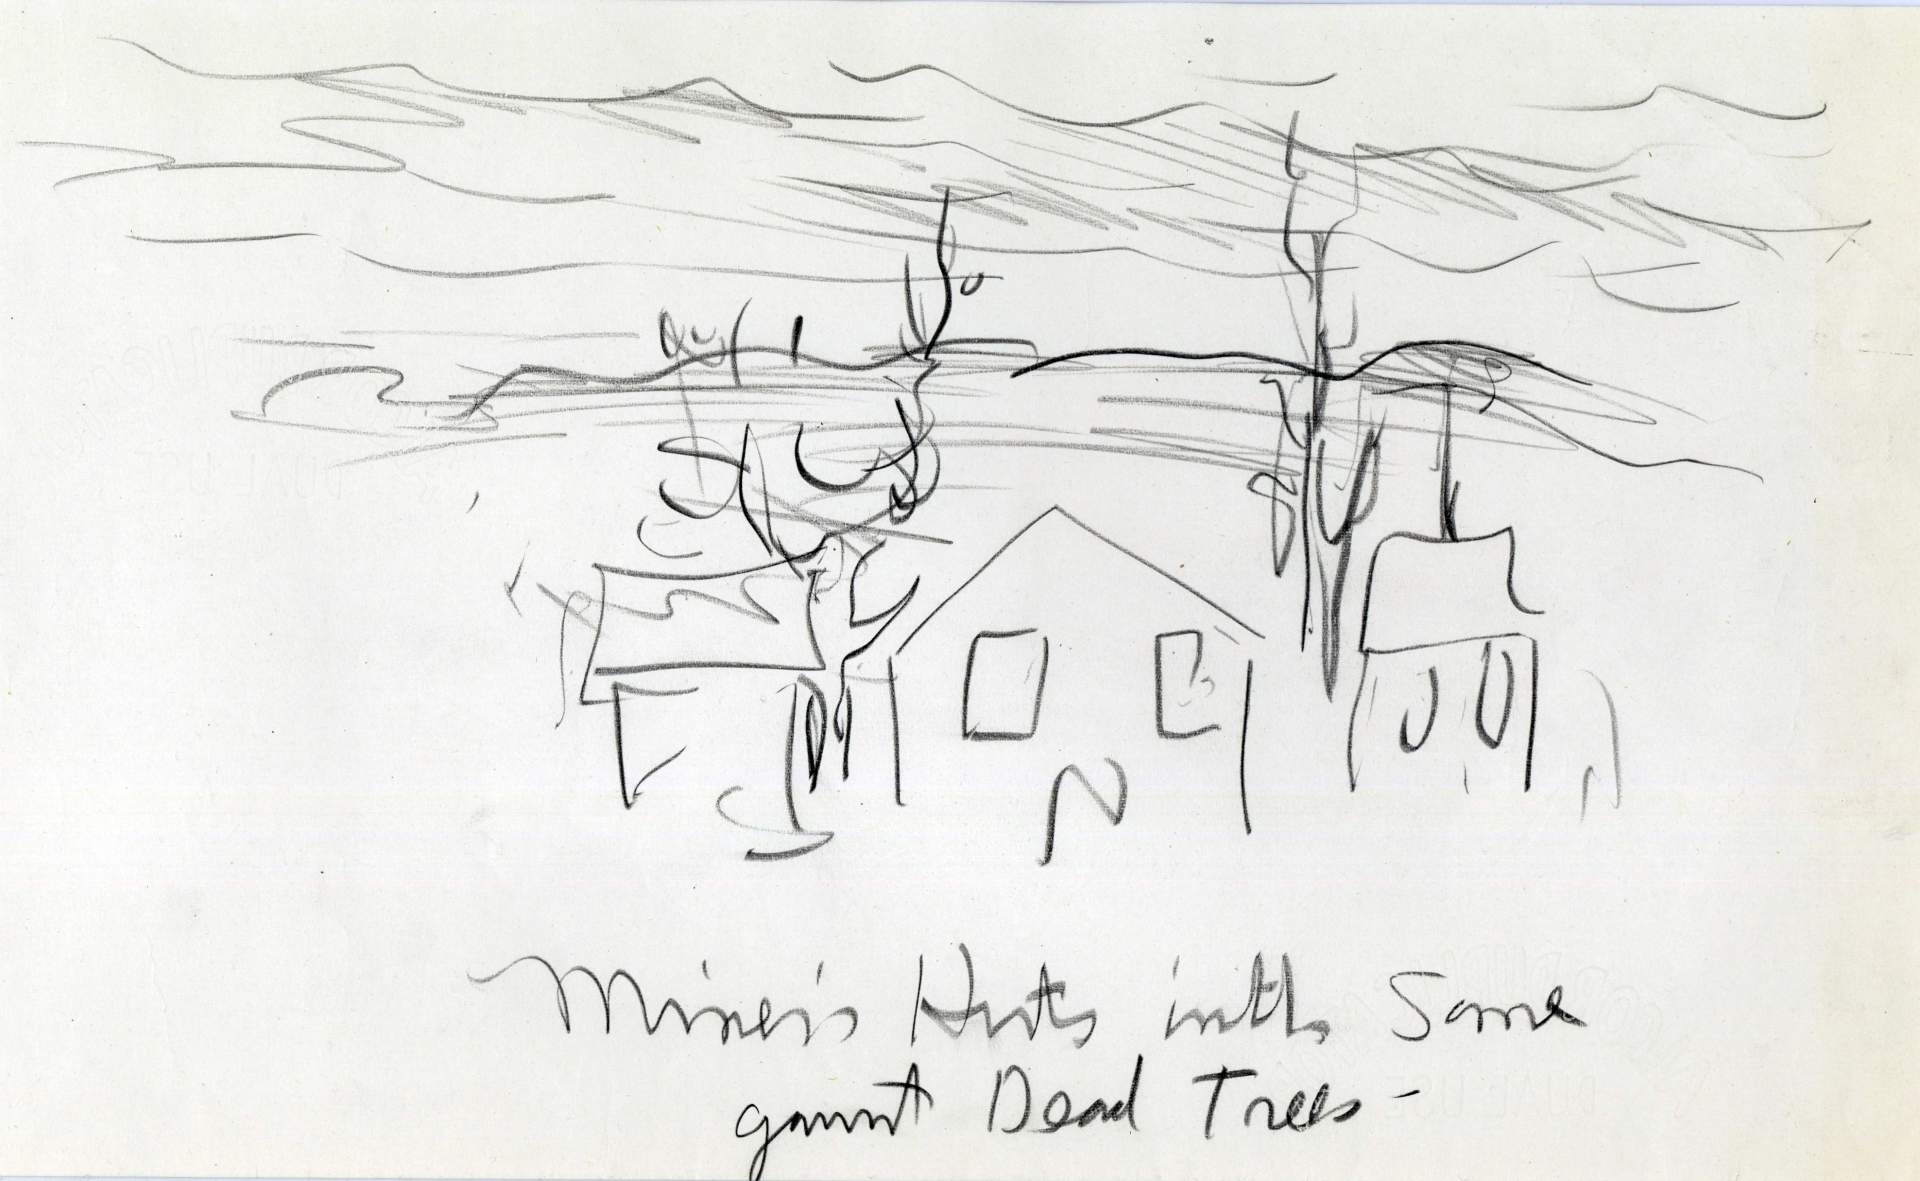 Untitled (Miner’s Huts with Some Gaunt Dead Trees)